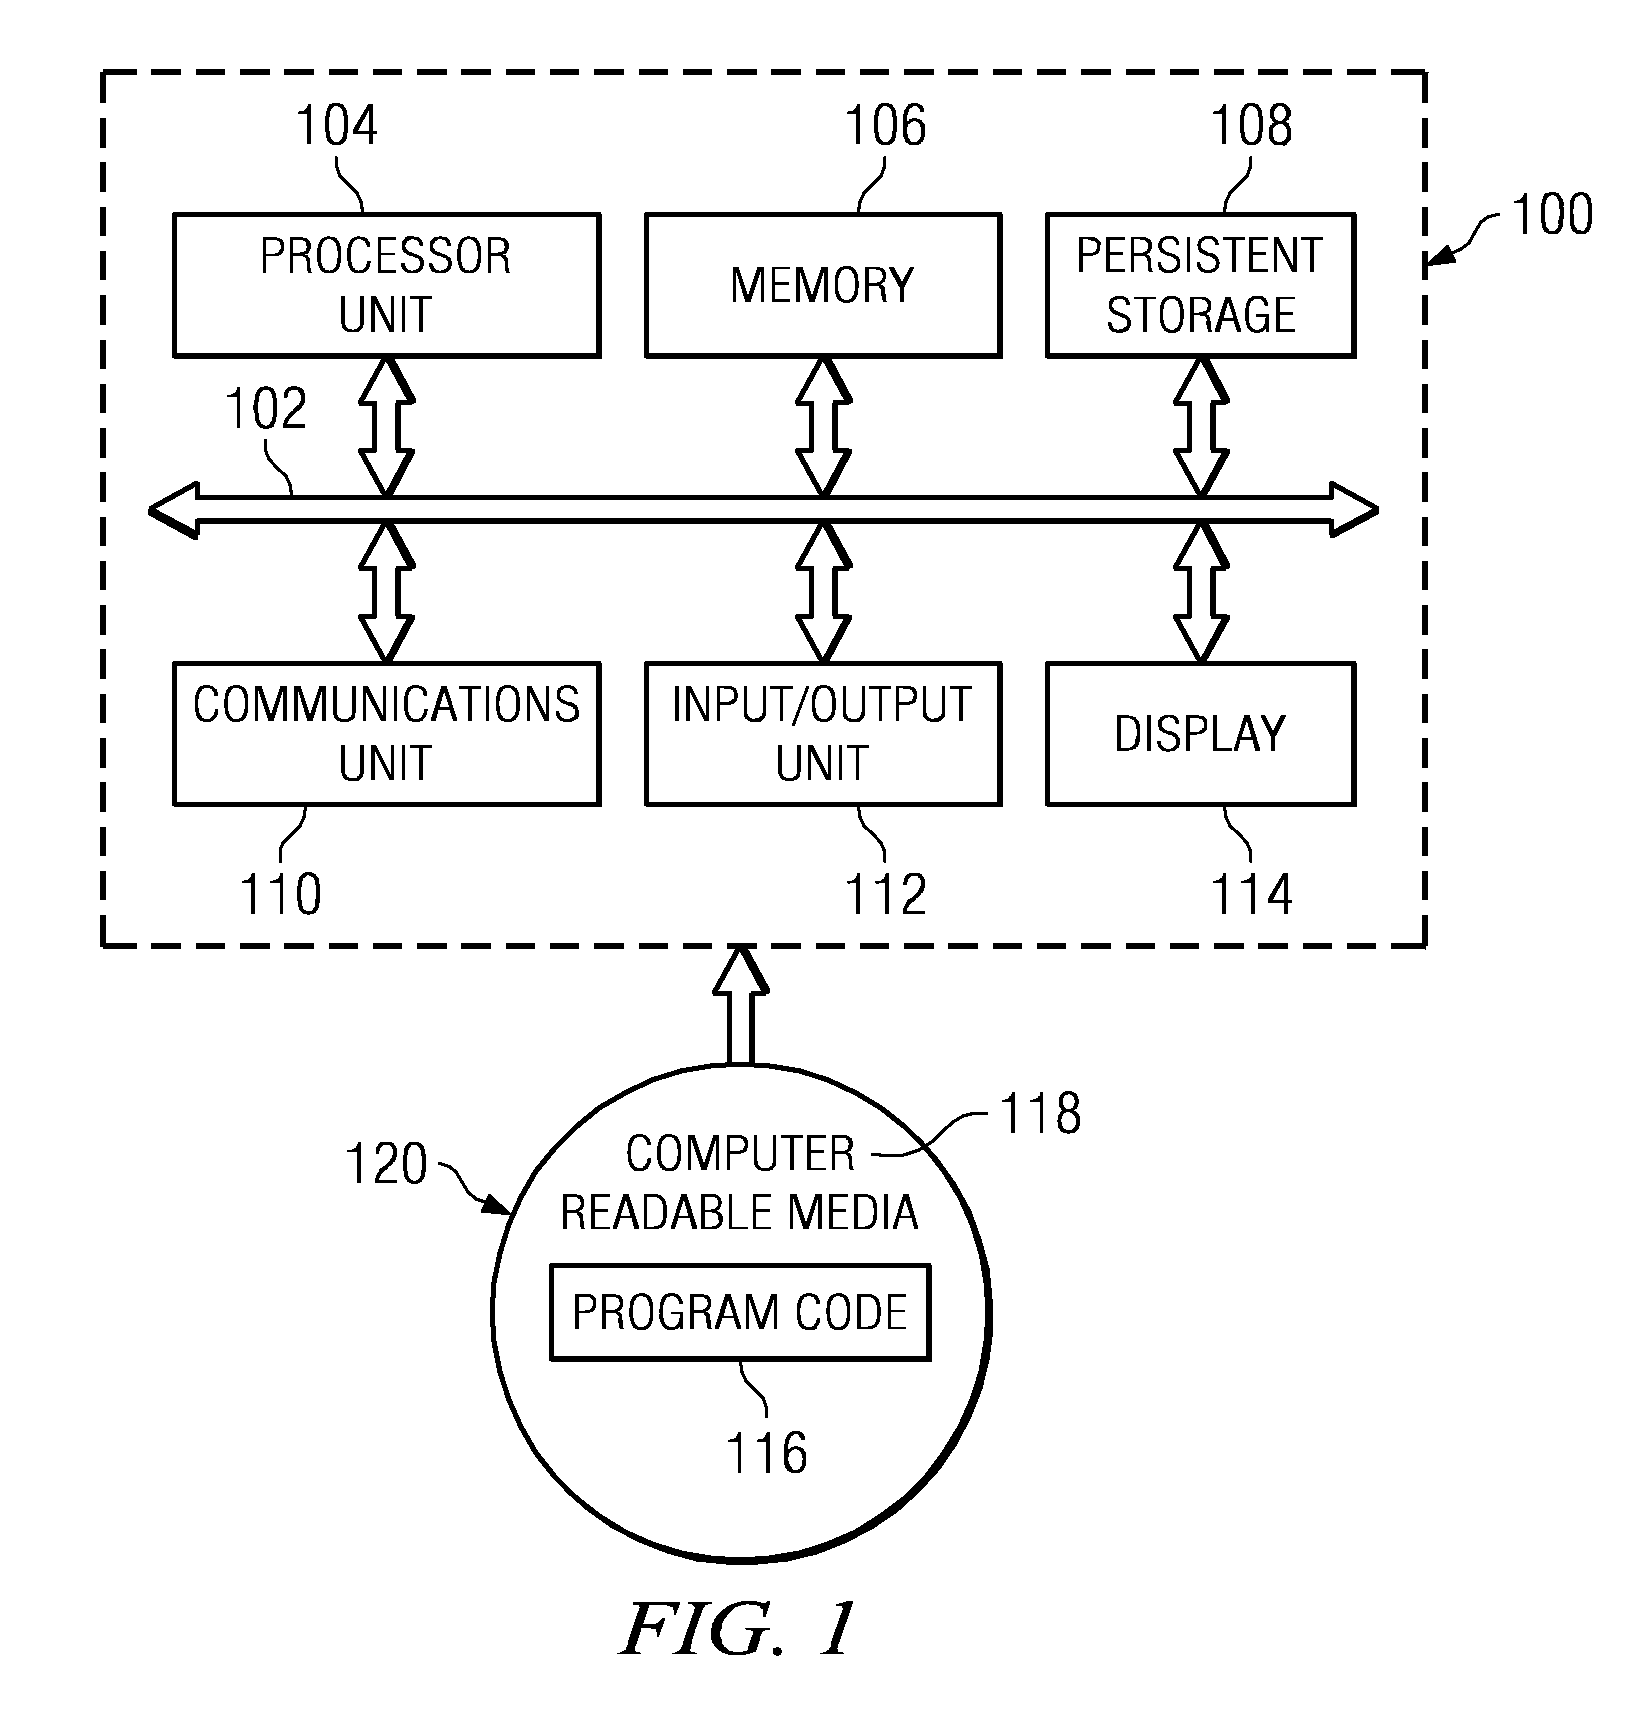 Method and system of multi-core microprocessor power management and control via per-chiplet, programmable power modes